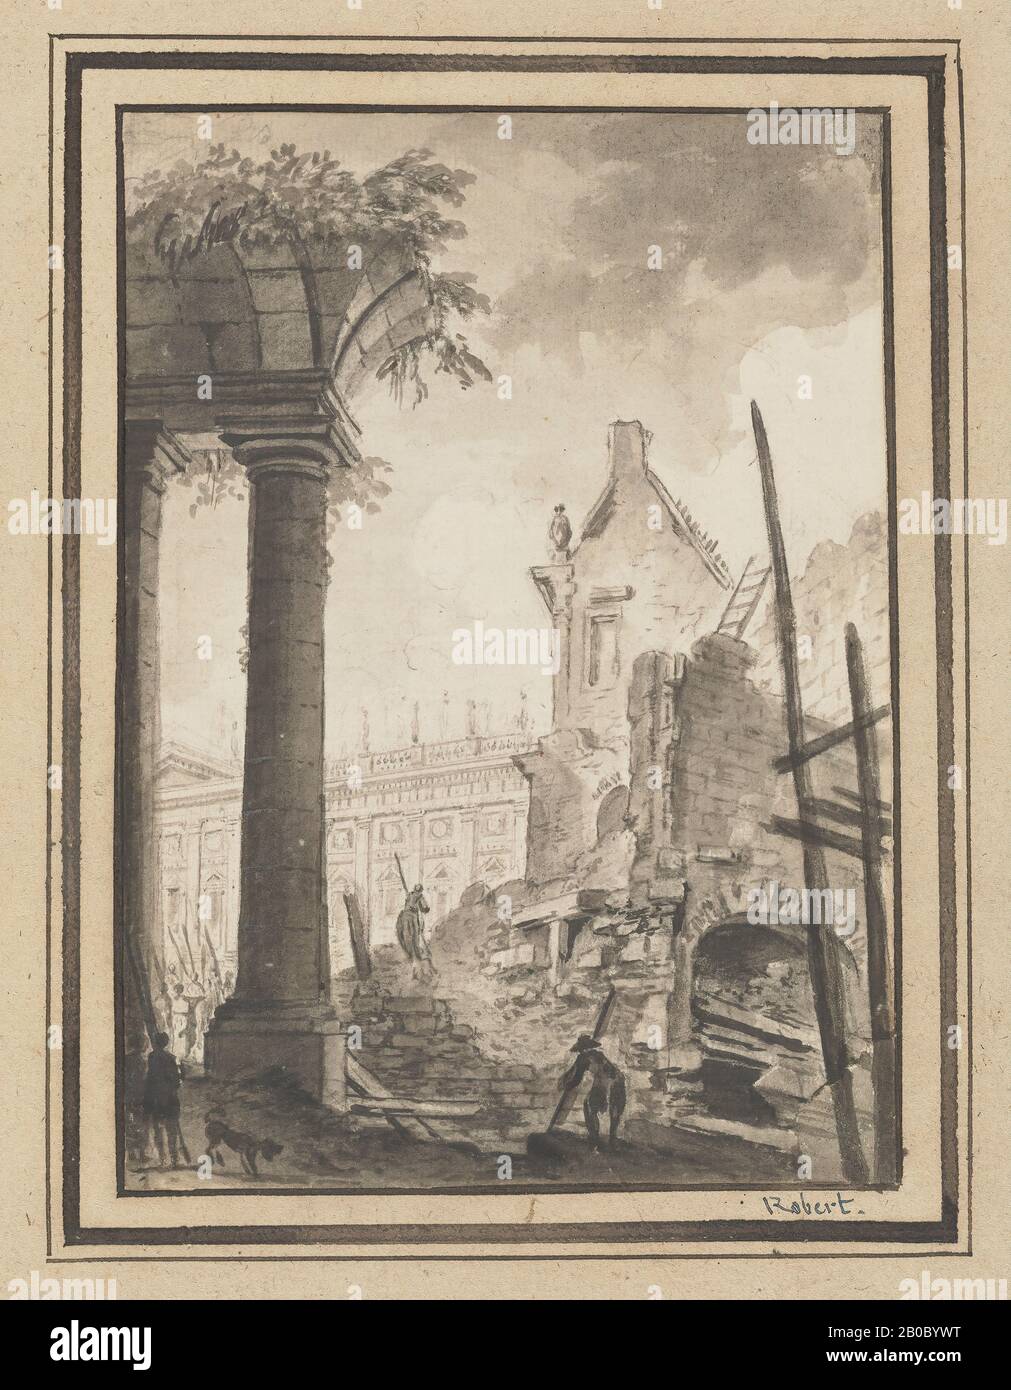 Pierre Antoine de Machy, Demolition of a Building with a View of the Louvre, 1723-1807, pen and black ink and black wash over graphite on paper, 6 5/8 in. x 4 3/4 in. (16.9 cm. x 12.1 cm.) Stock Photo